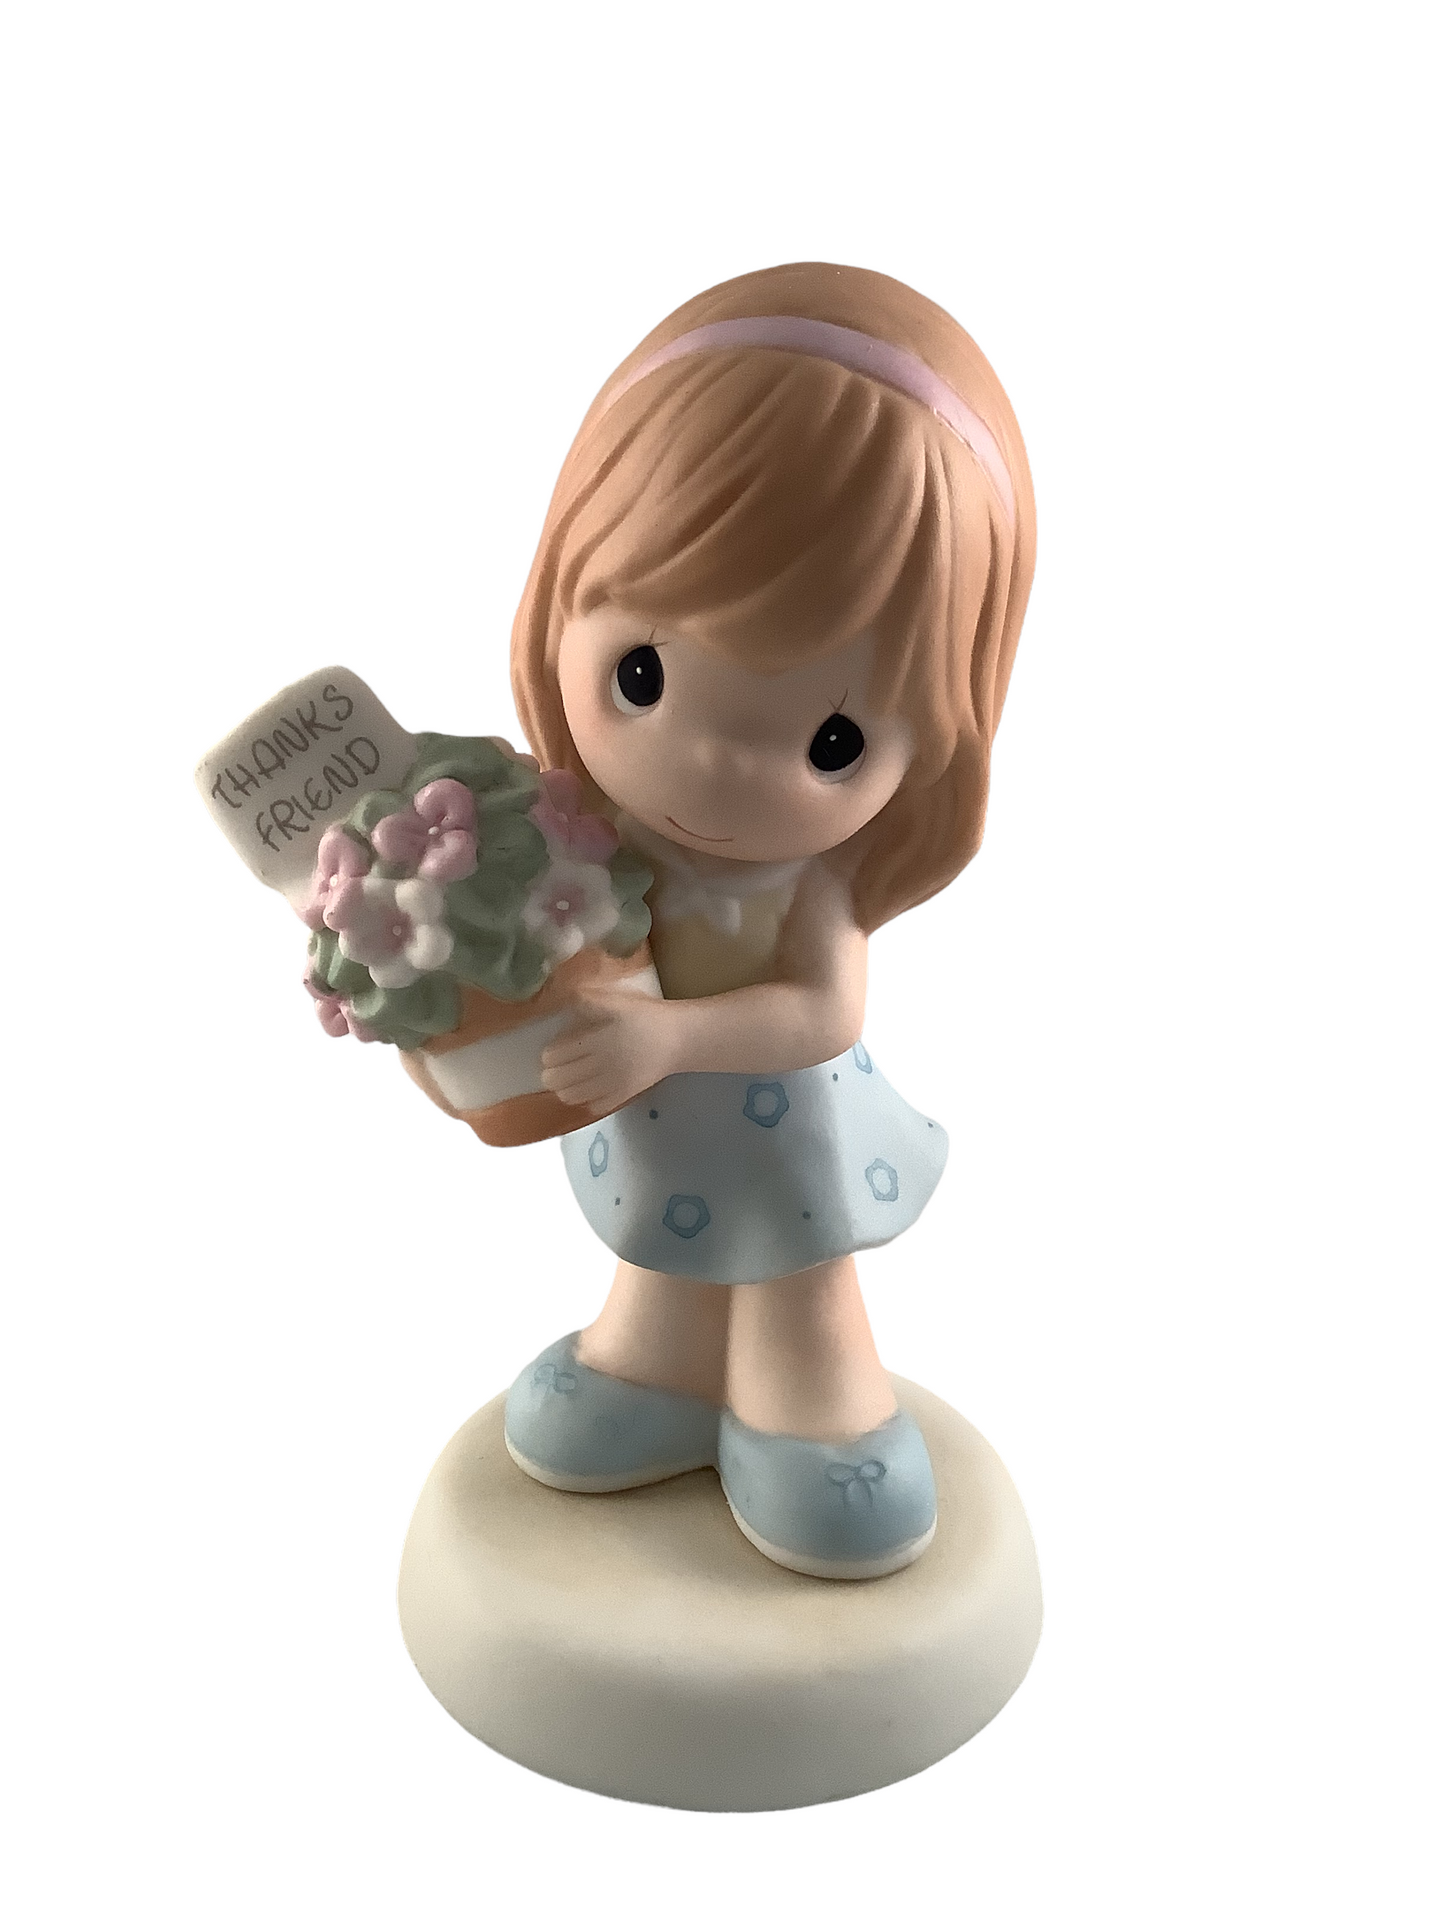 Thank You For Being A Friend - Precious Moment Figurine